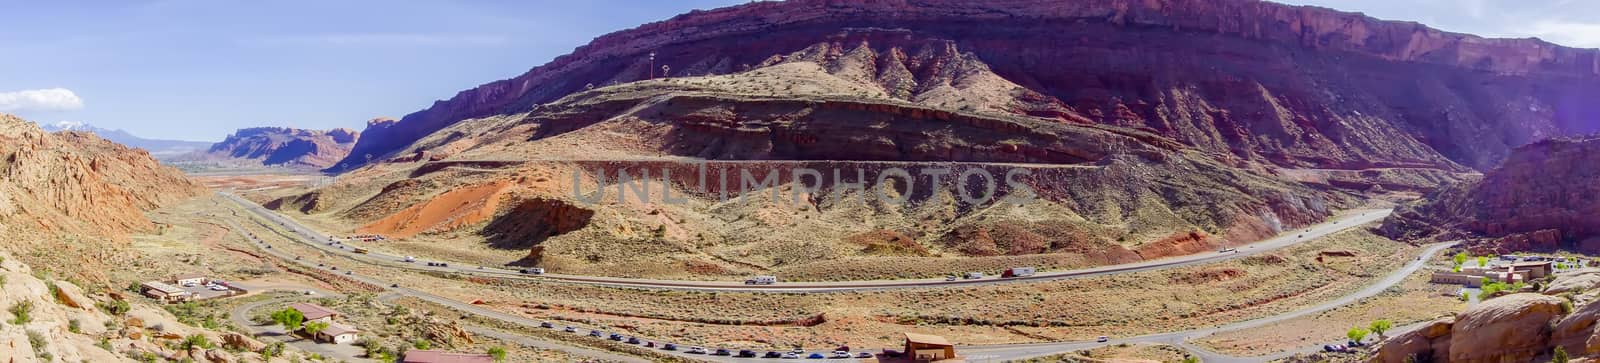 panoramic view of entrance to Arches National Park  by digidreamgrafix